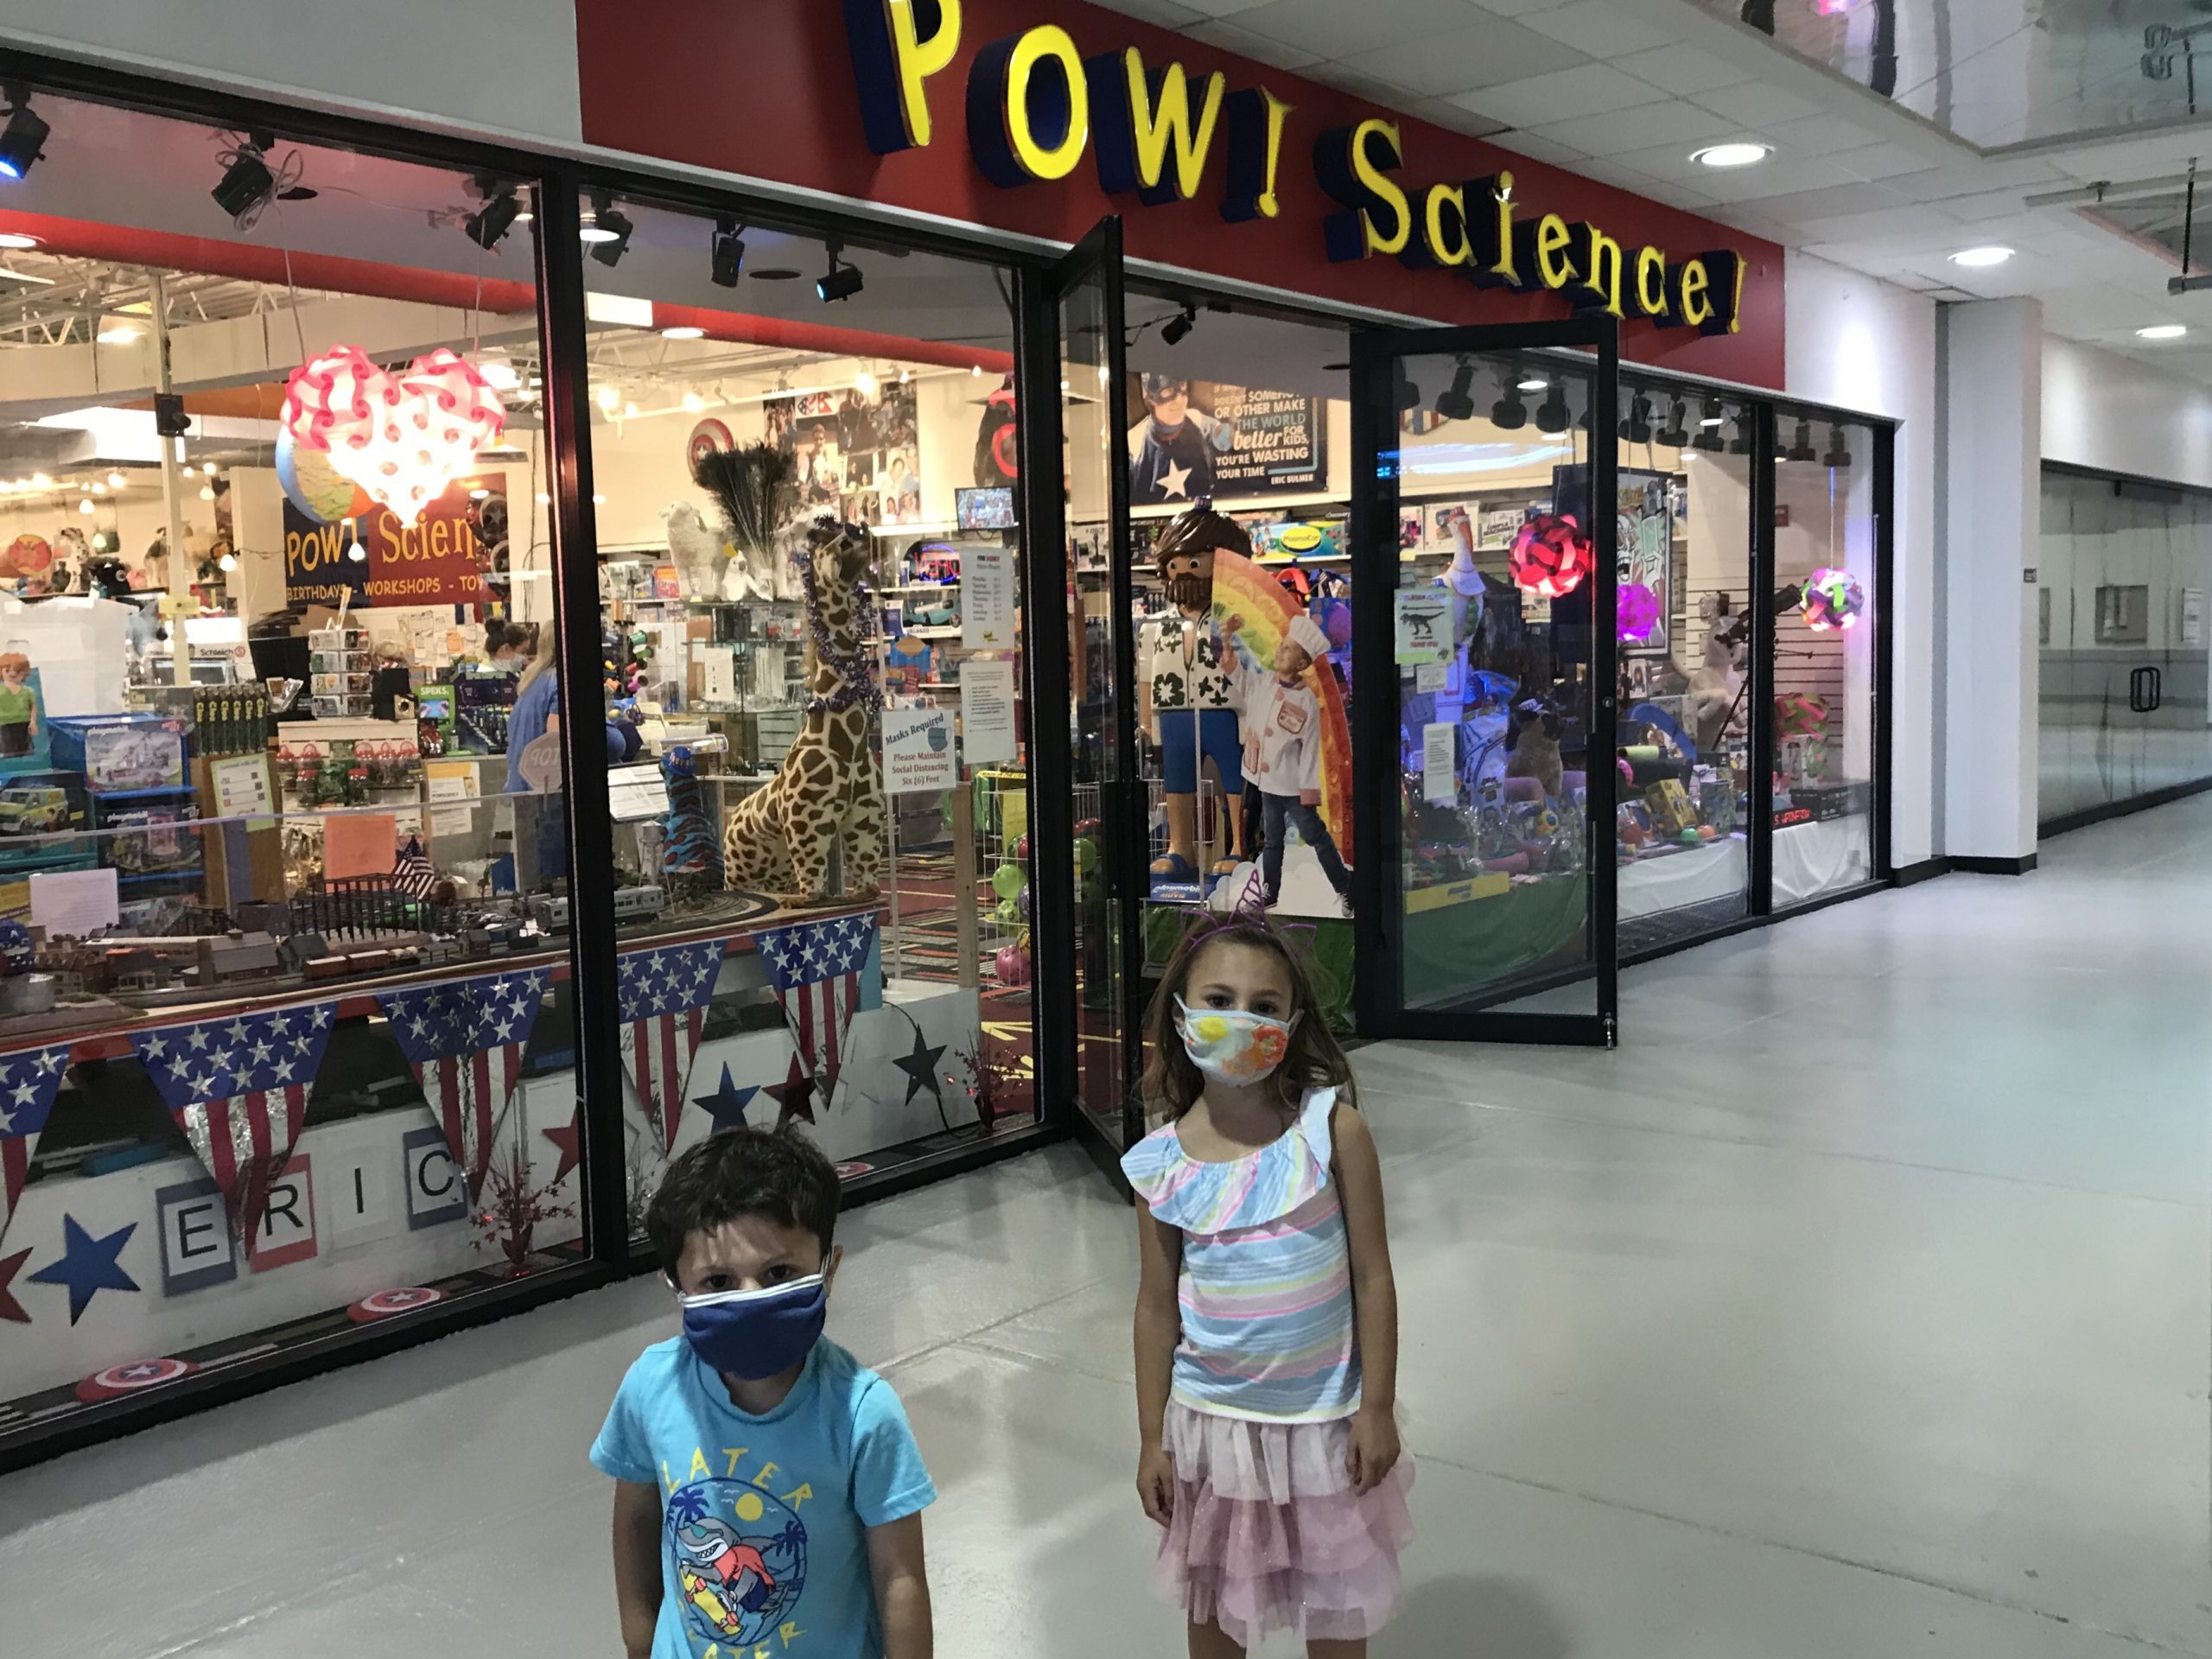 Pow! Science kids toy store and science activity center with hands-on activities